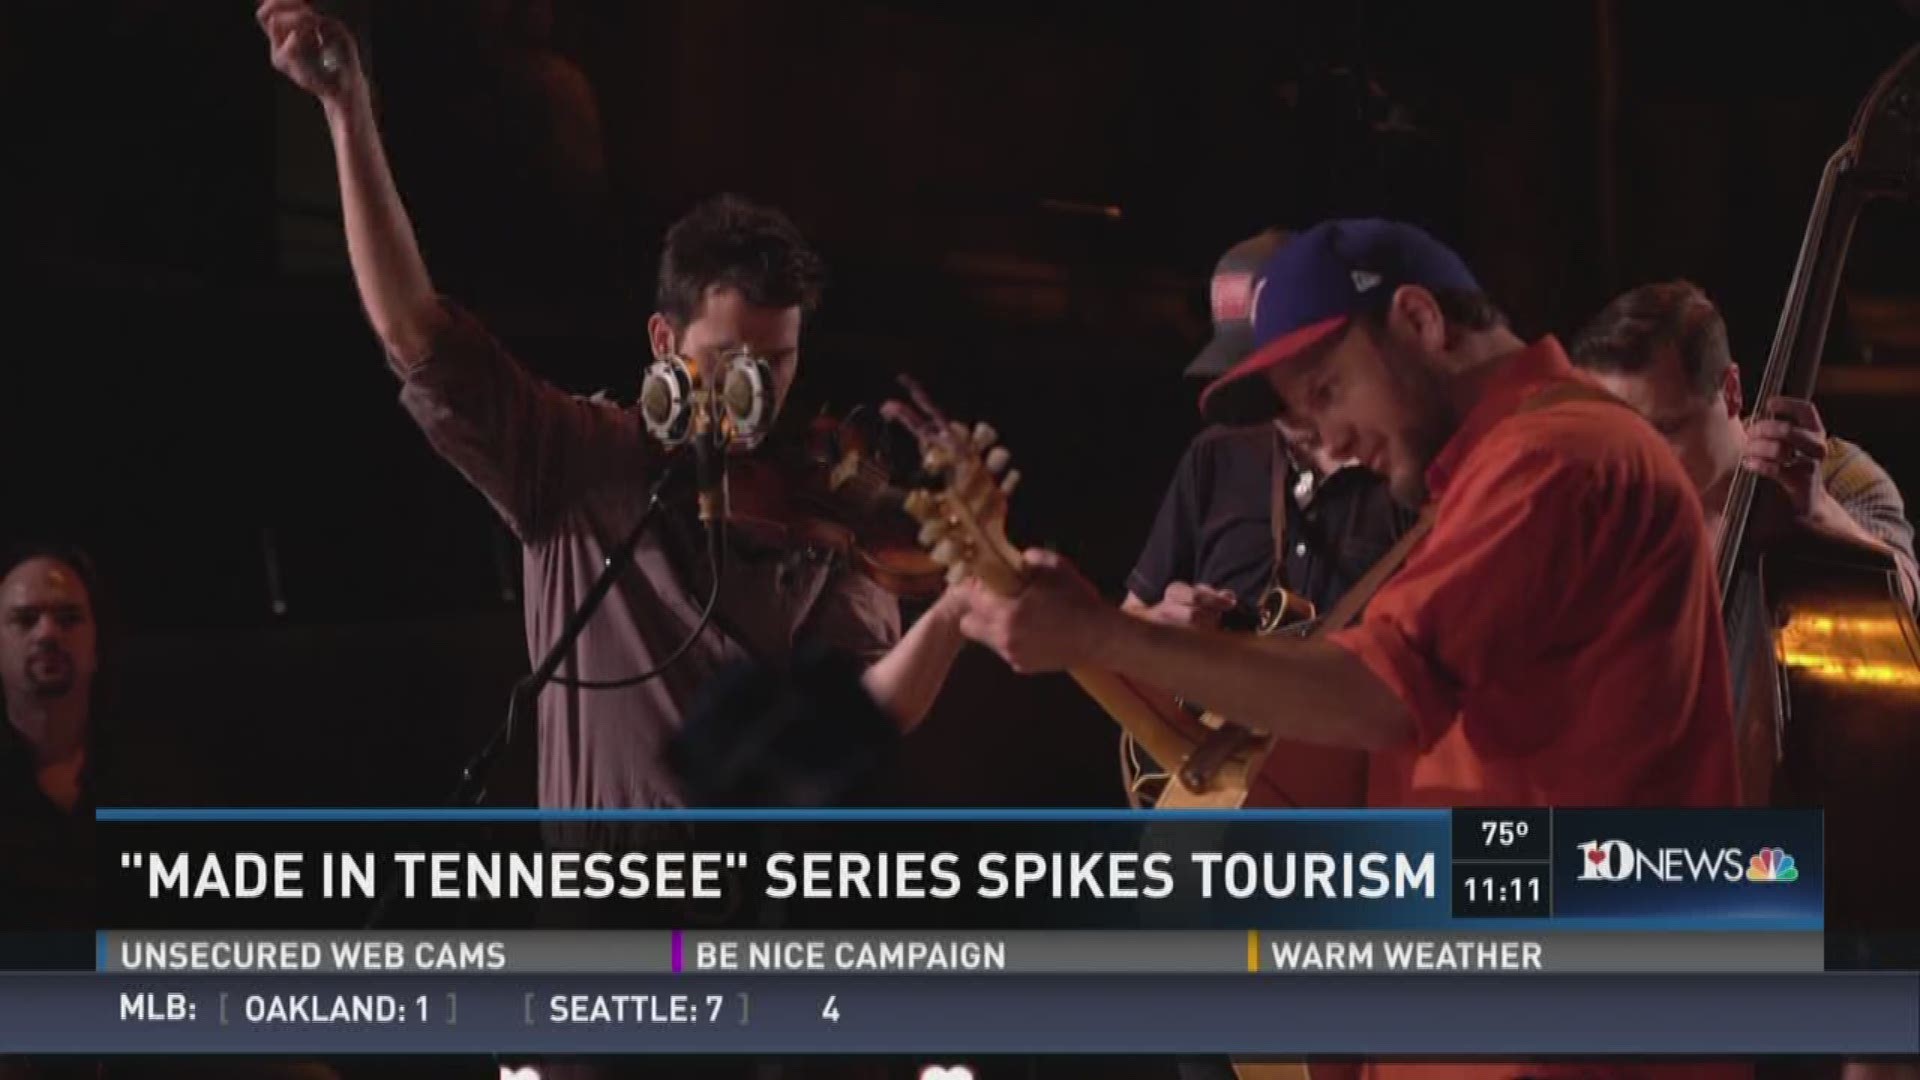 A free concert broadcast from hours away is spiking tourism in Tennessee.